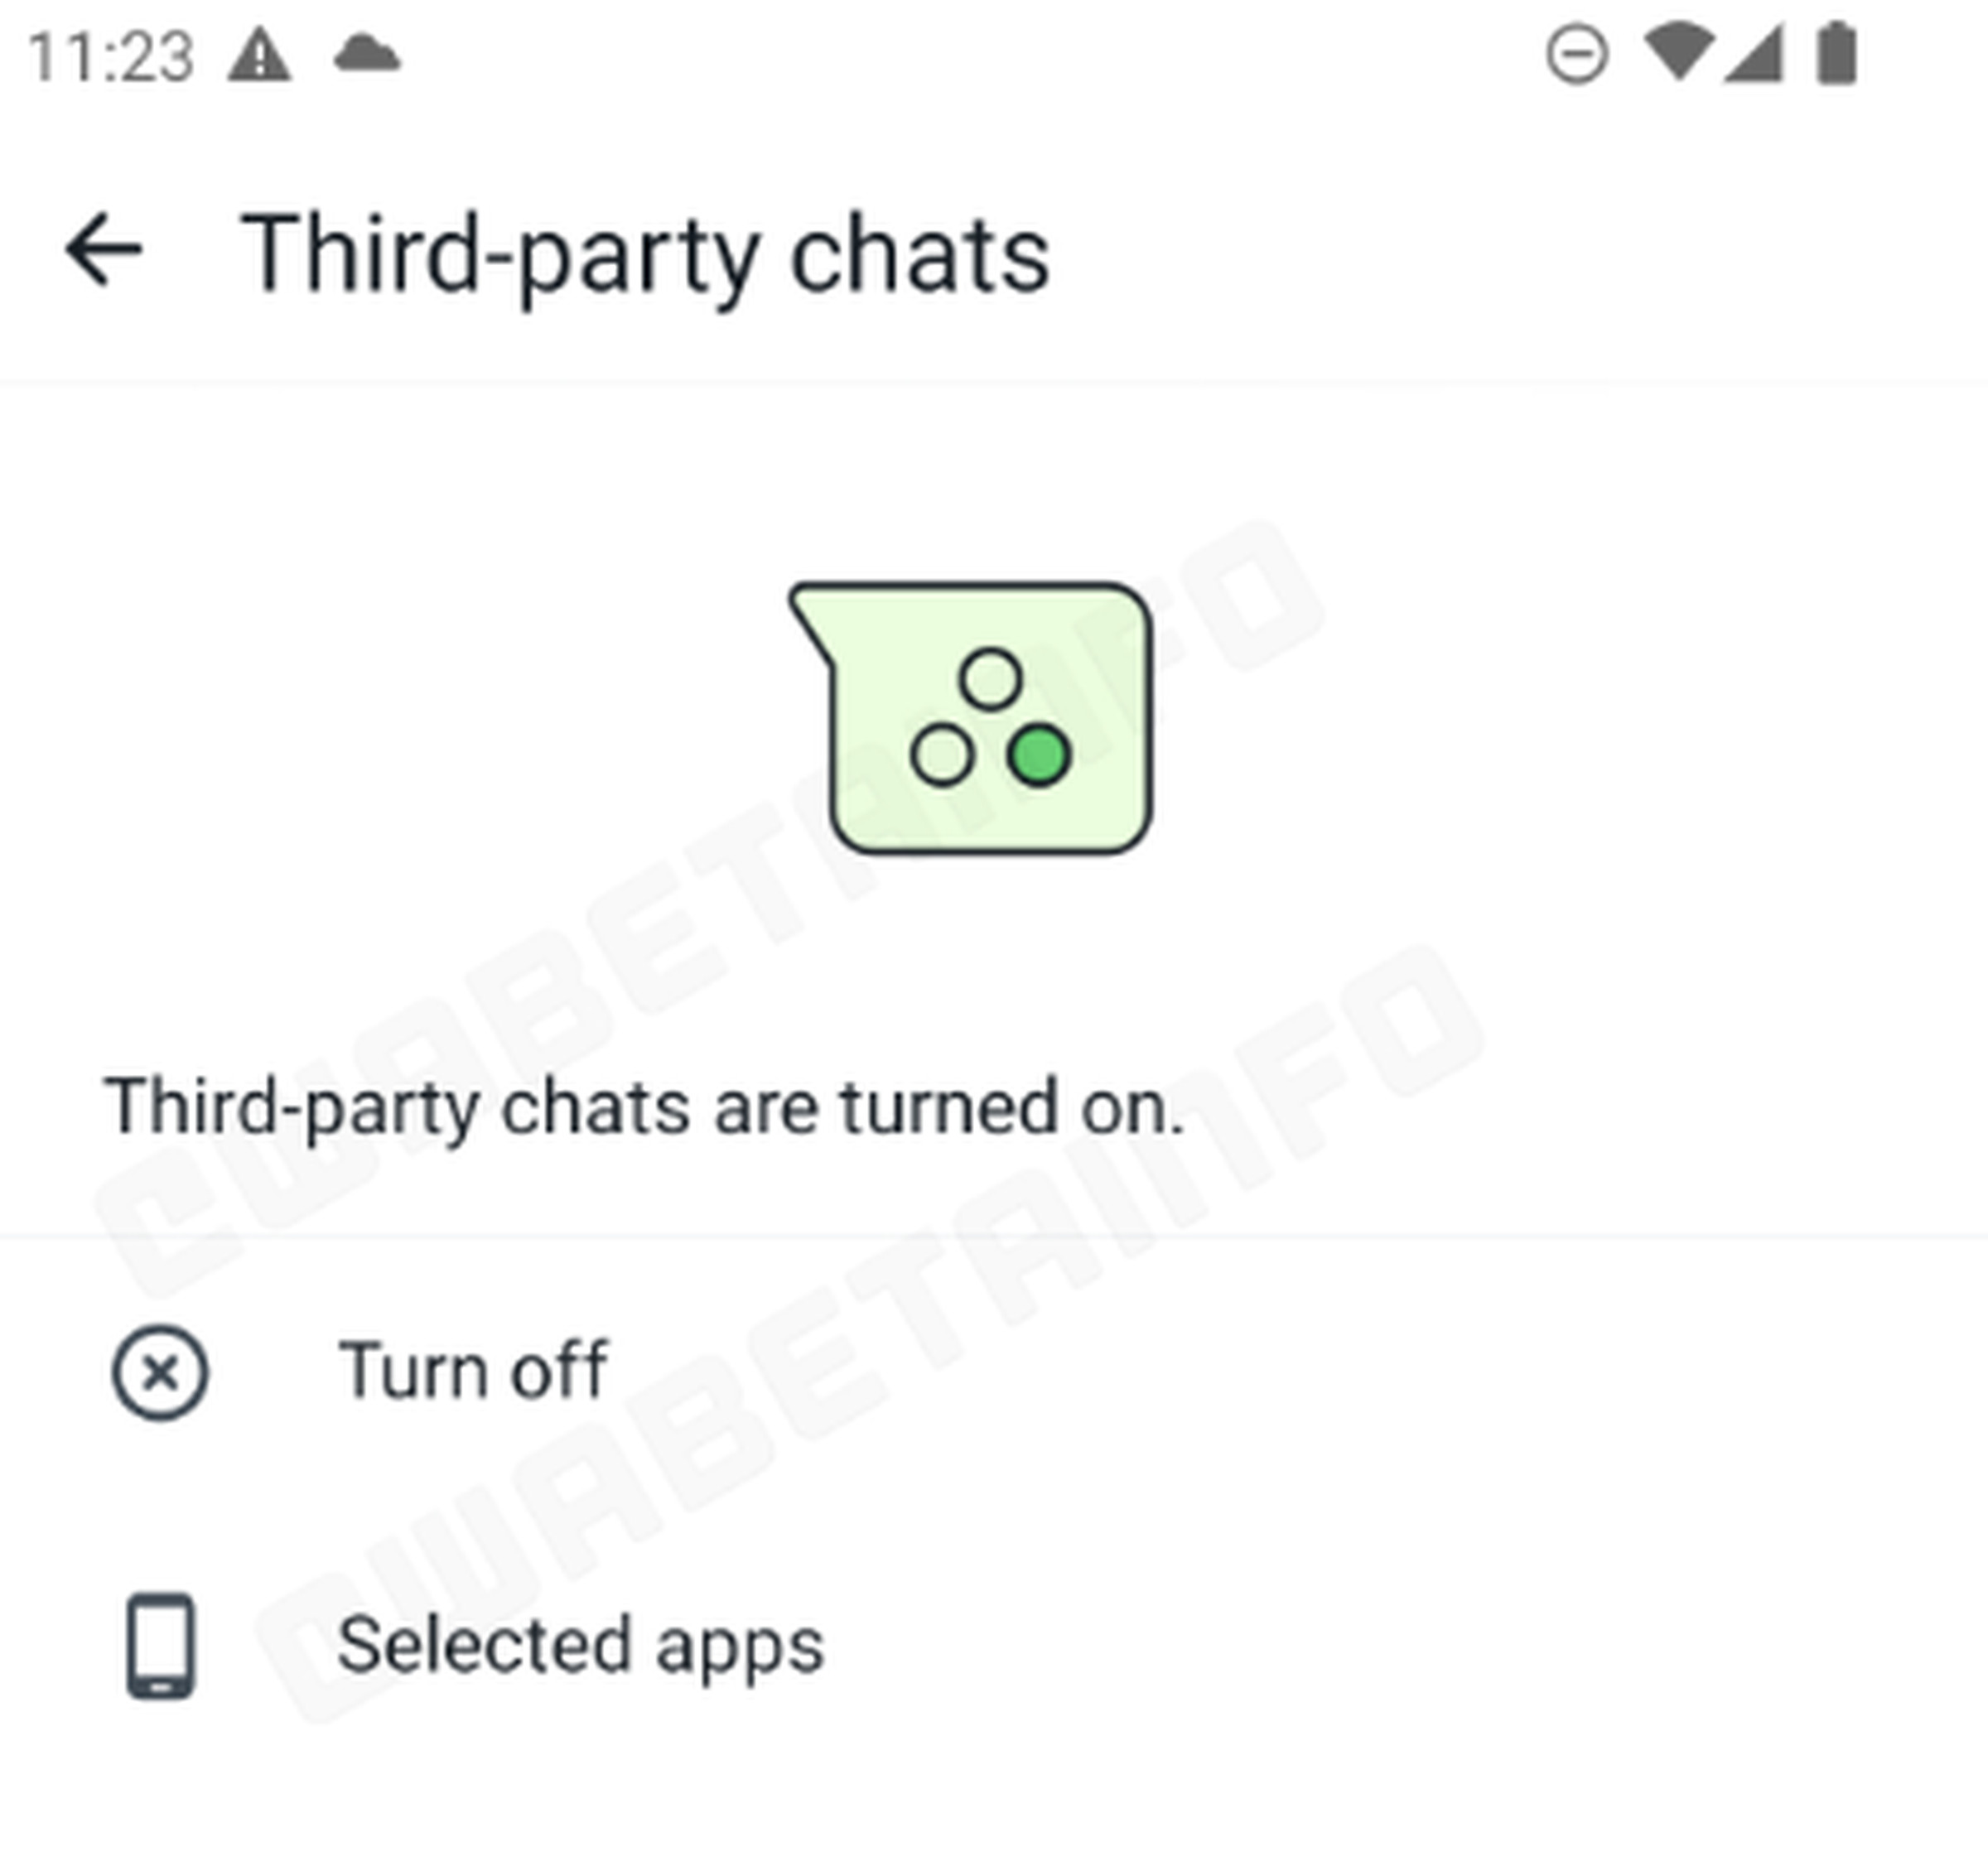 A screenshot of the third-party chats management screen in the WhatsApp beta.